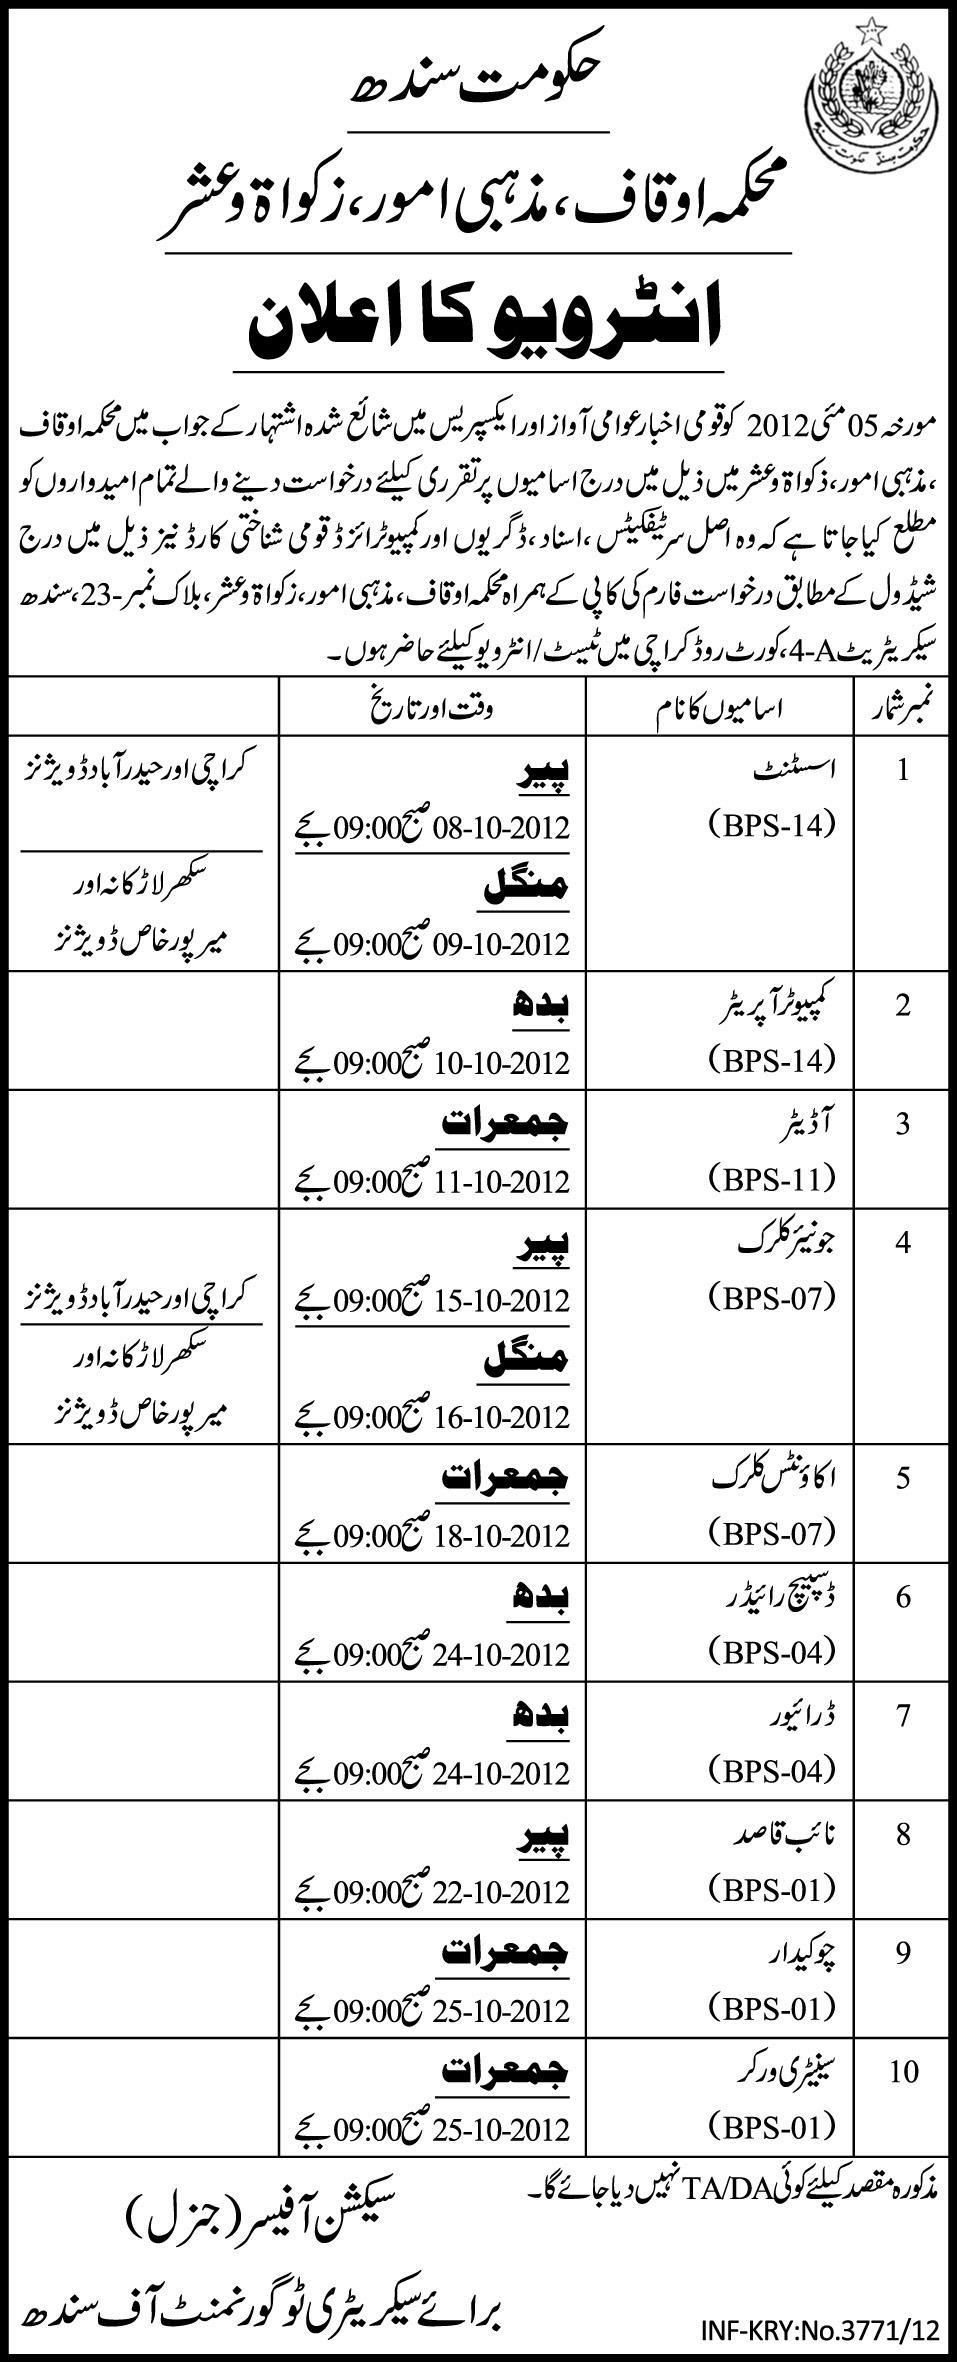 Government of Sindh Department of Auqaf, Religious Affairs, Zakat & Ushr Jobs (Government Job)